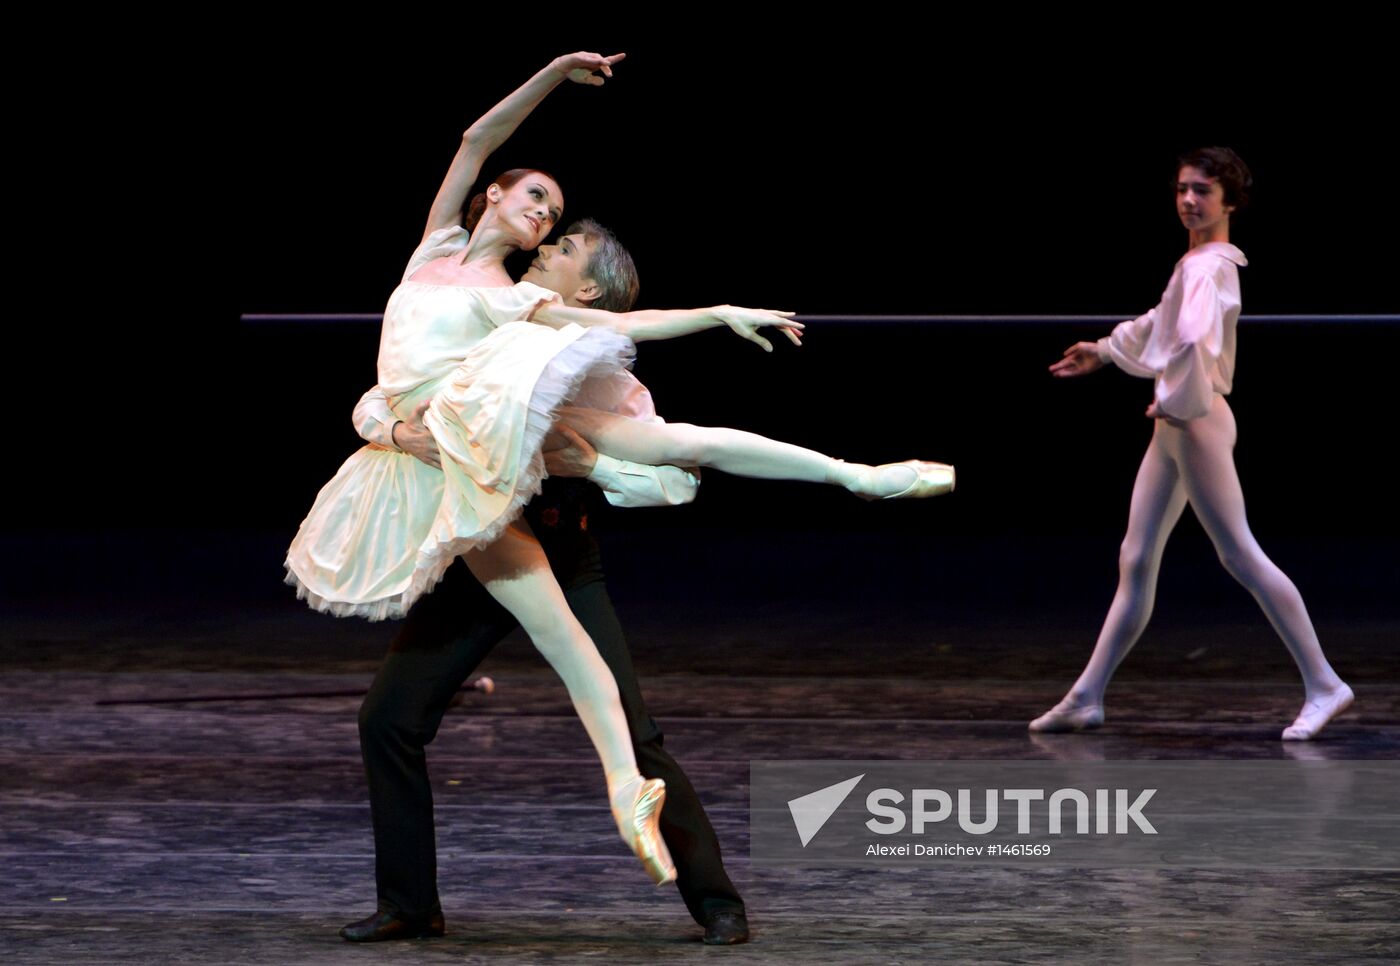 New stage opens at Mariinsky Theater